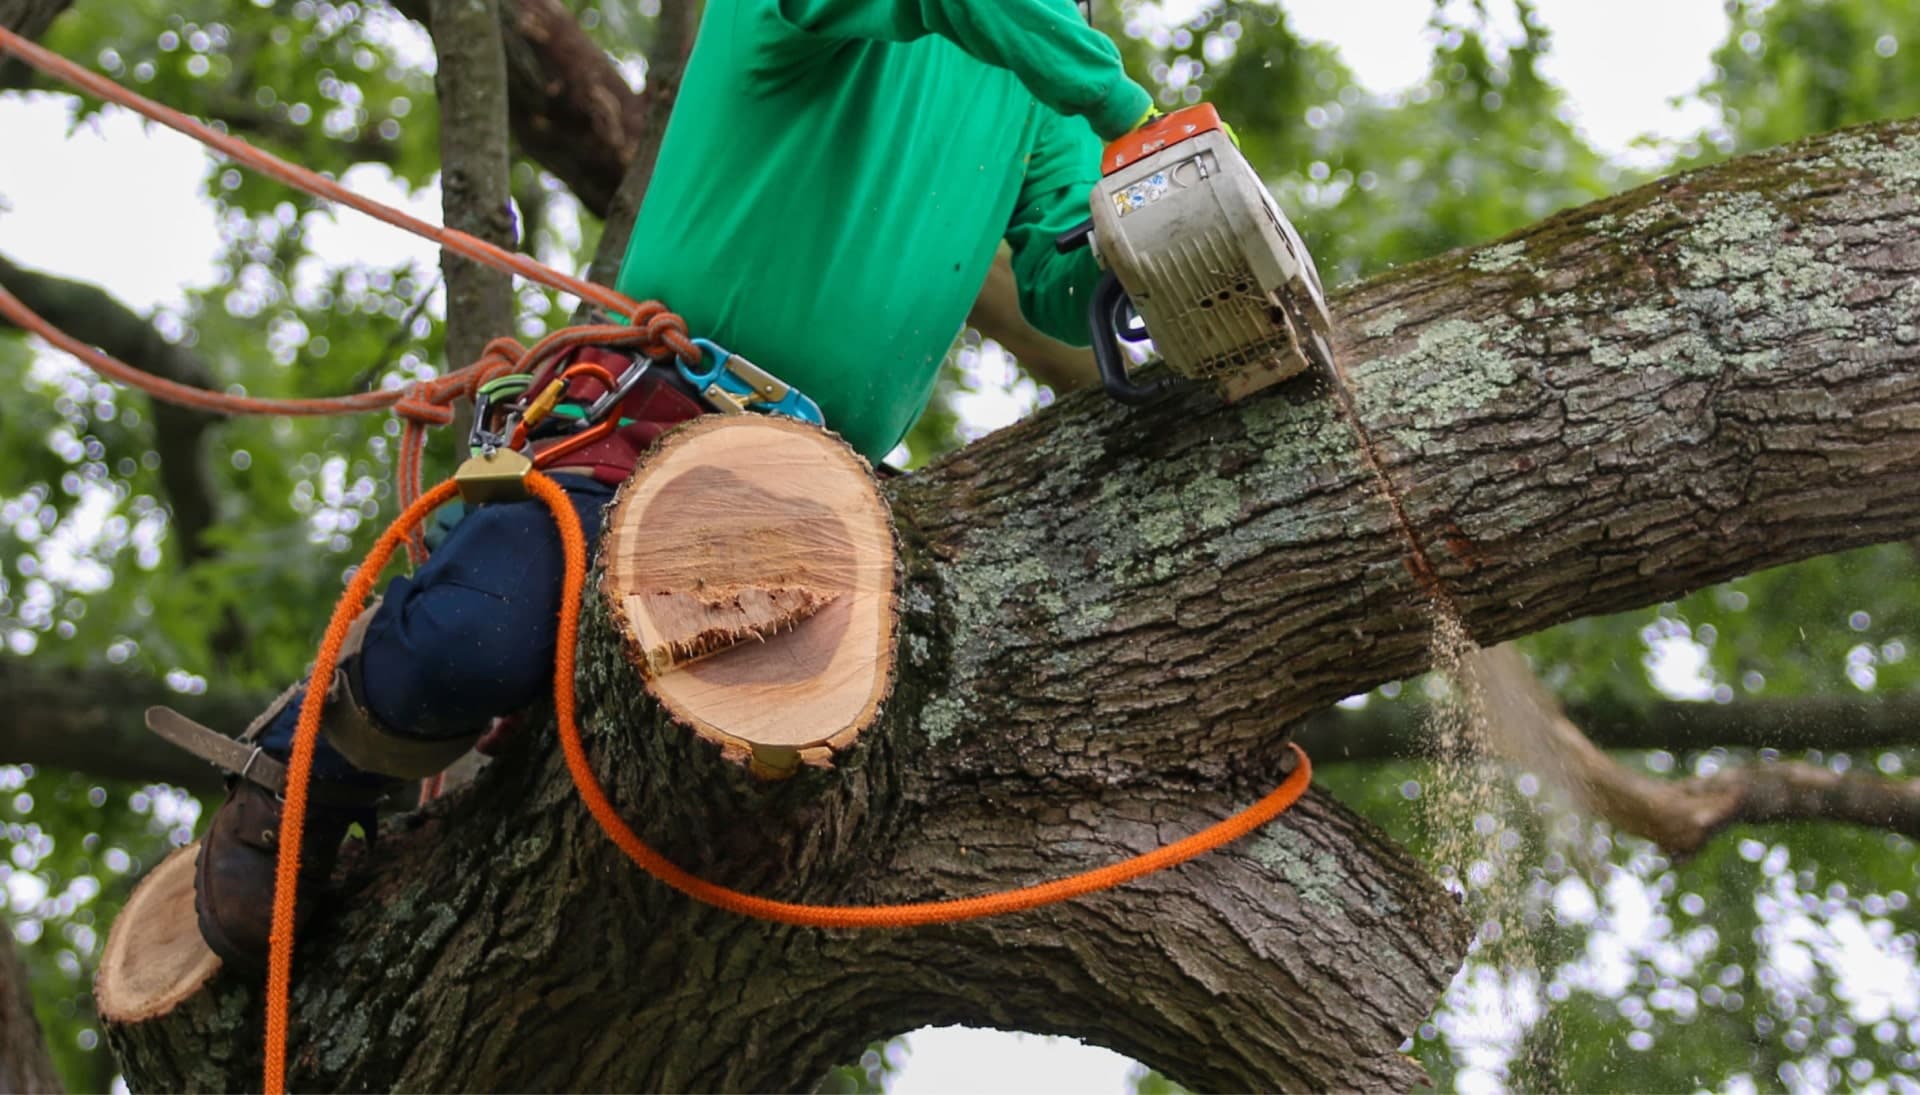 Shed your worries away with best tree removal in Idaho Falls